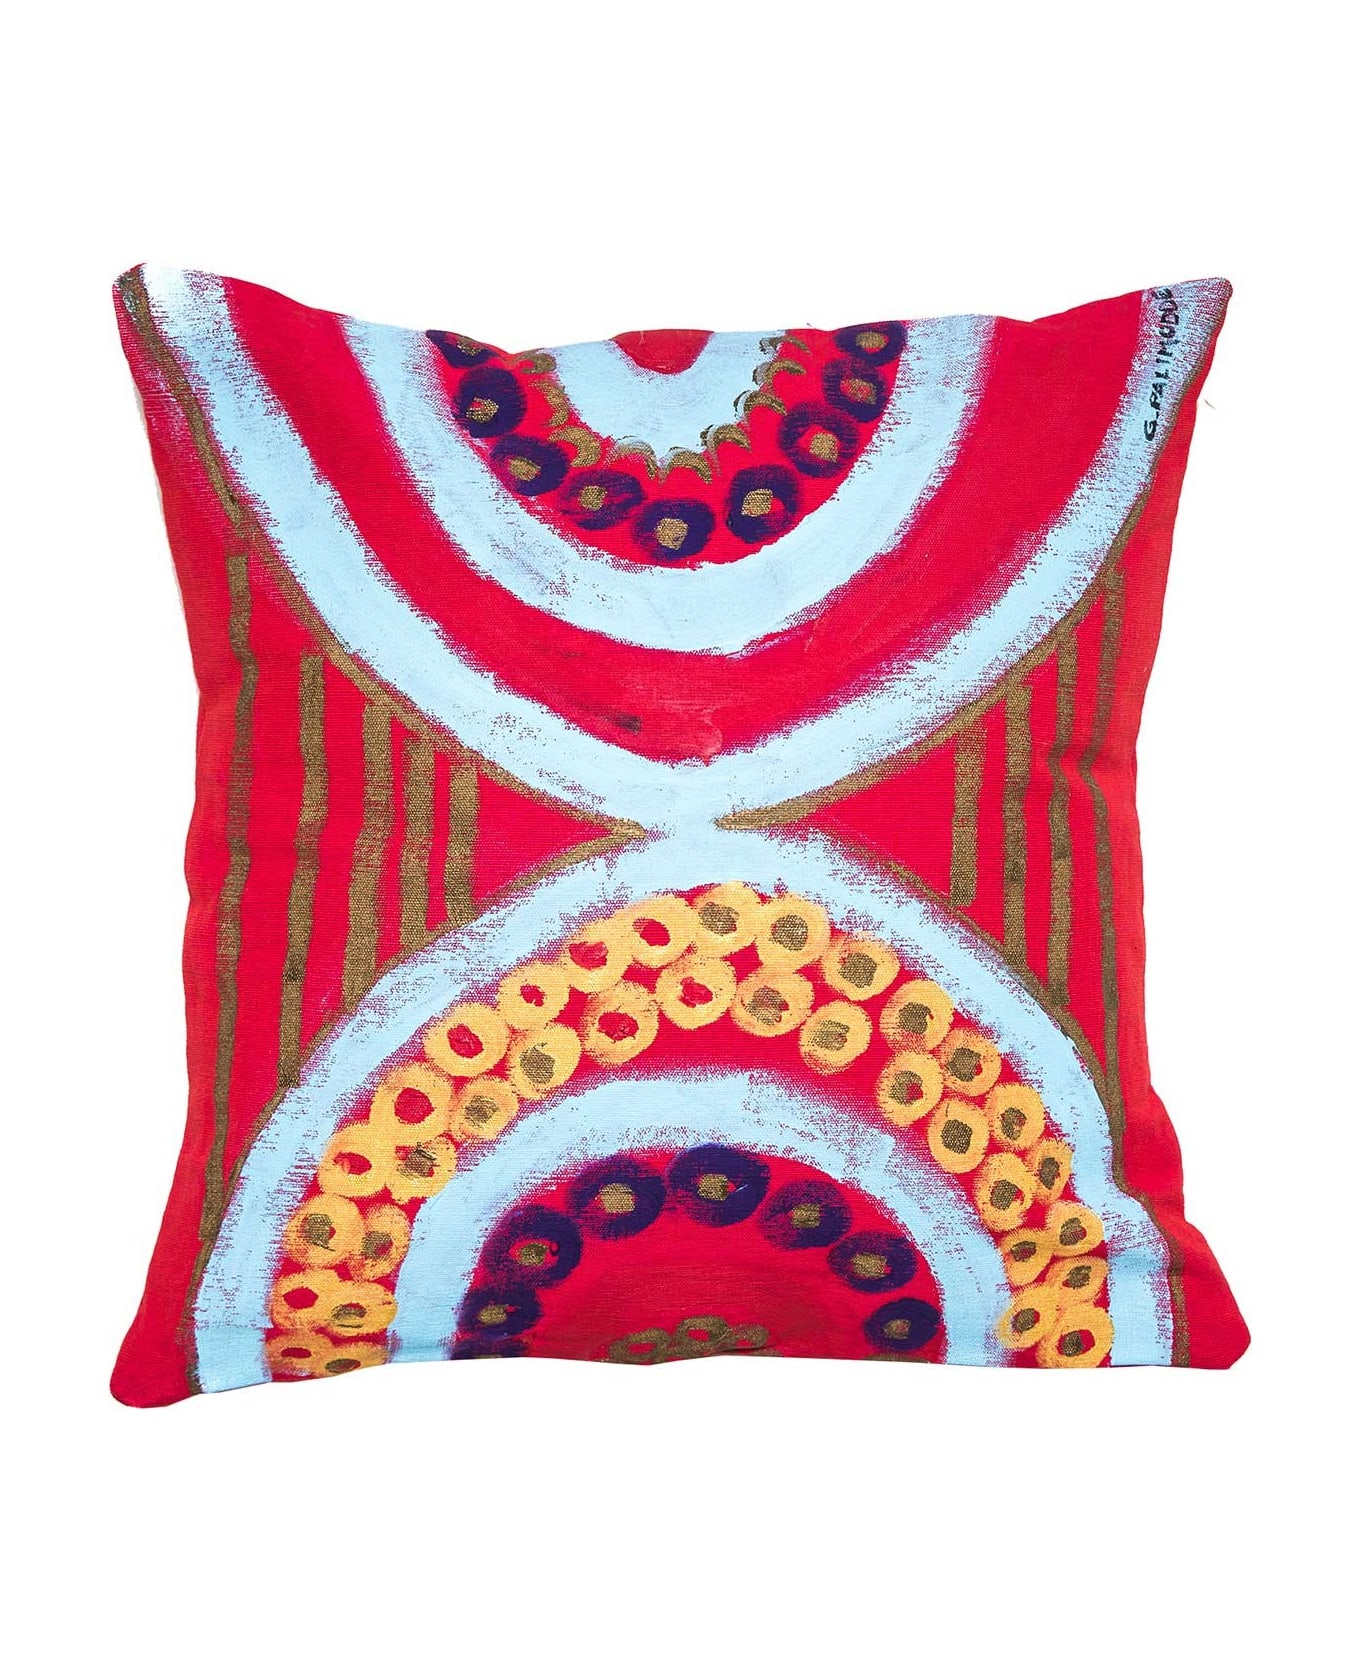 Le Botteghe su Gologone Acrylic Hand Painted Outdoor Cushion 50x50 cm - Red Fantasy